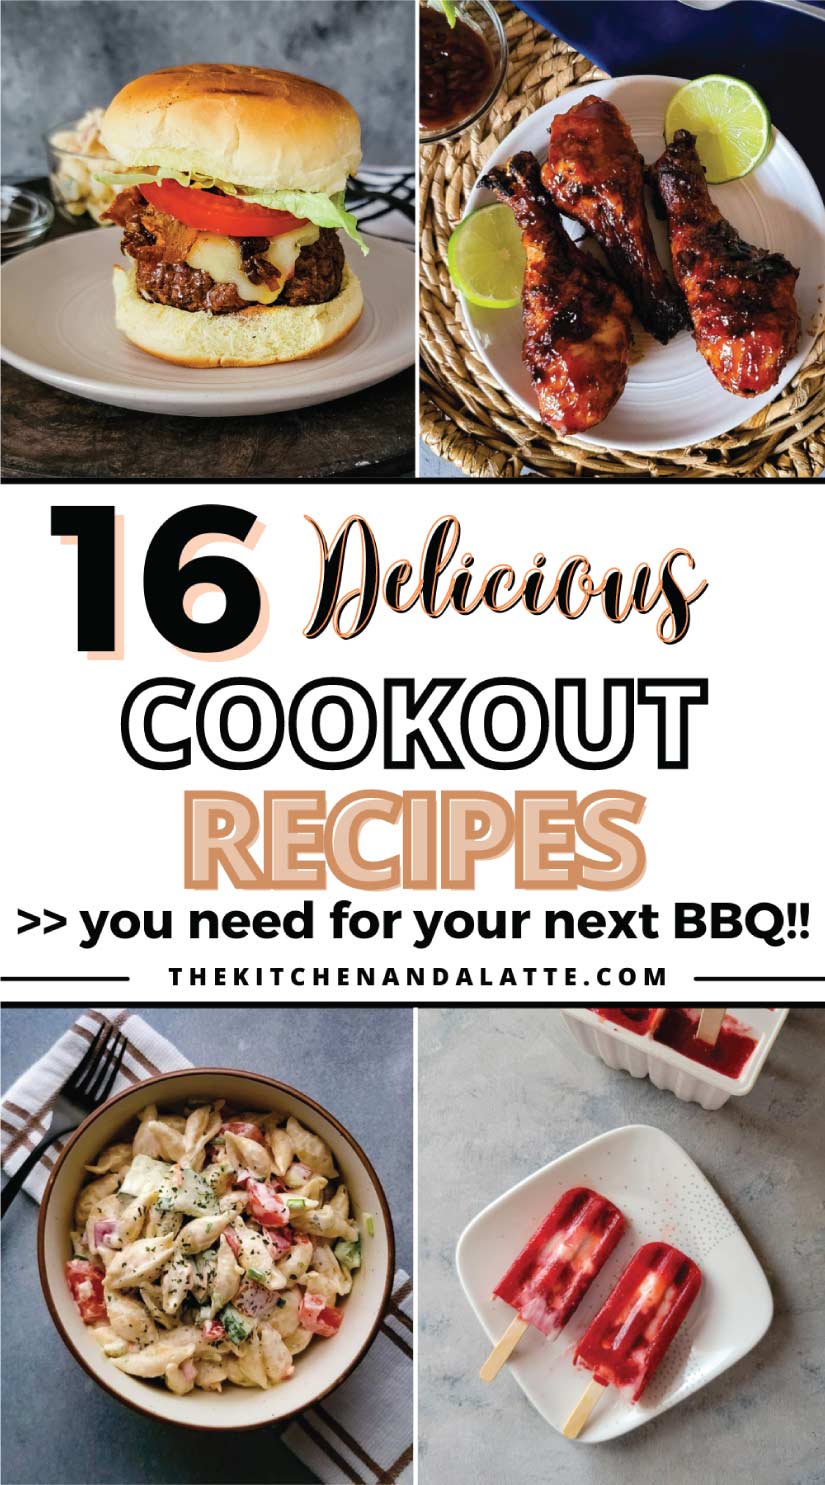 Pinterest graphic - 16 Delicious Cookout Recipes you need for your next BBQ! Grilled cheeseburger on a plate, BBQ chicken legs on a serving plate, ranch pasta salad in a serving bowl and 2 popsicles on a plate.